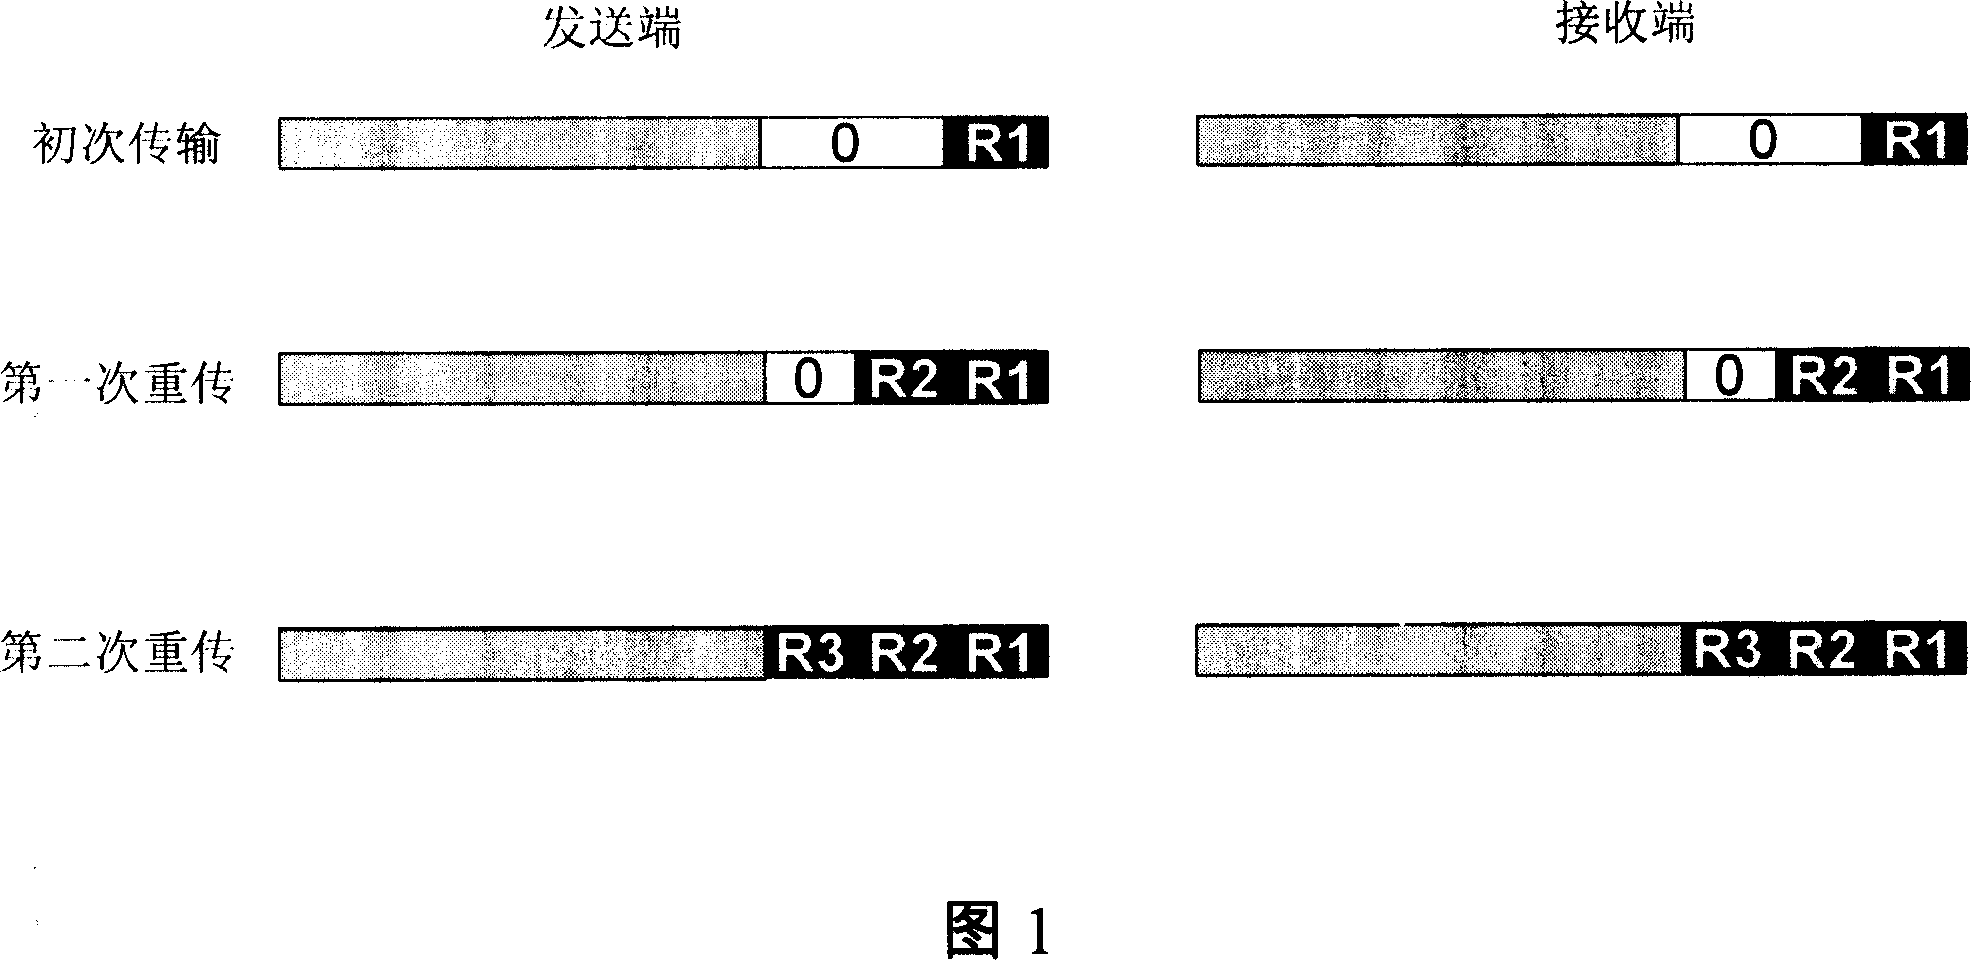 Method for carrying out data transmission using the low-density parity check code